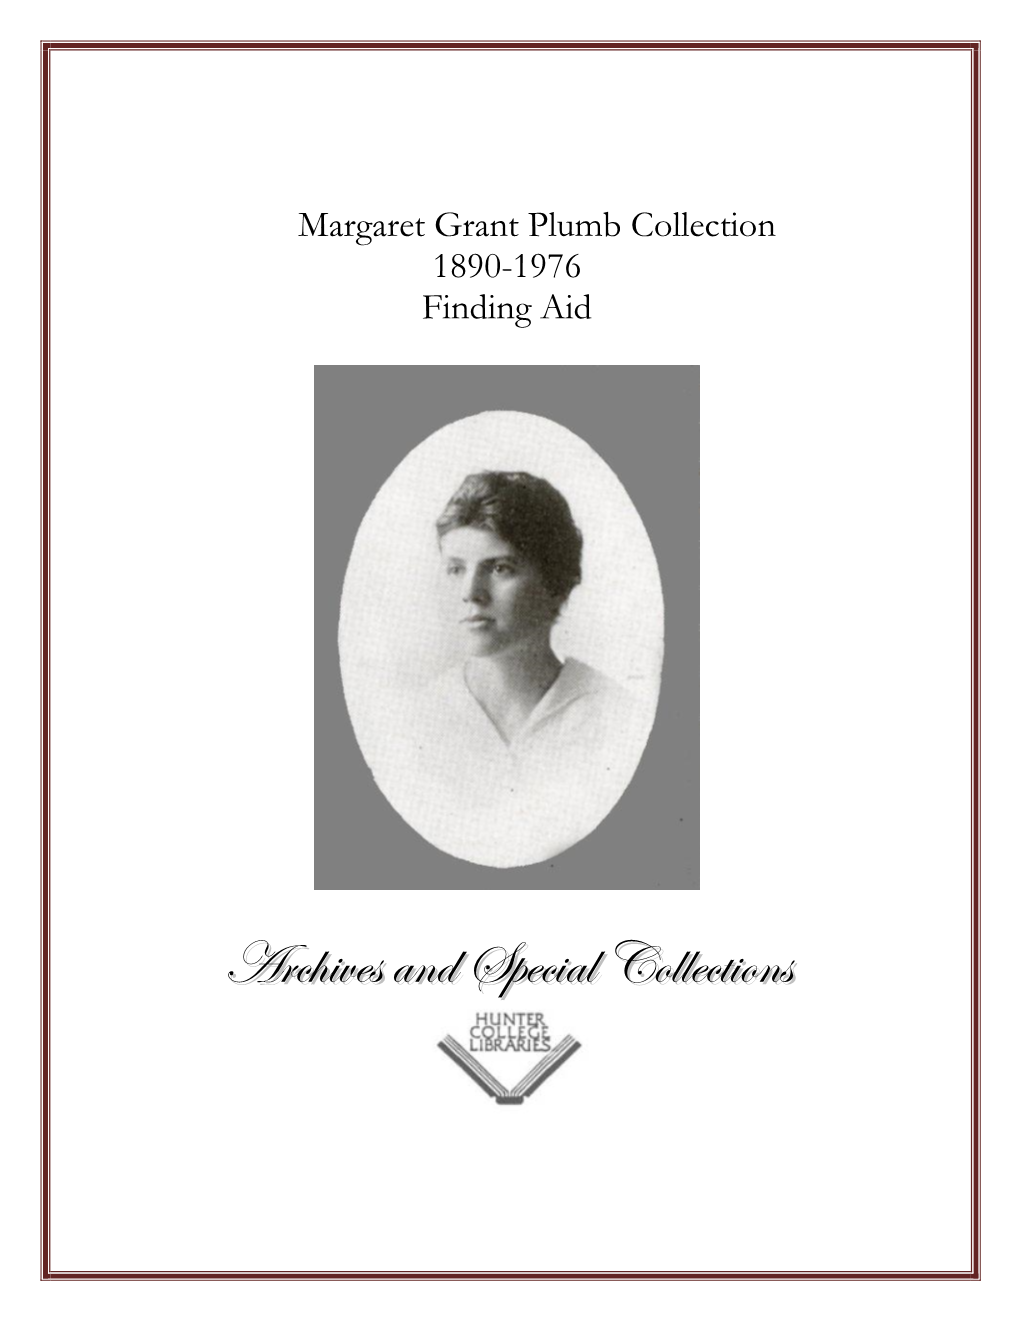 Margaret Grant Plumb Collection, 1890-1976